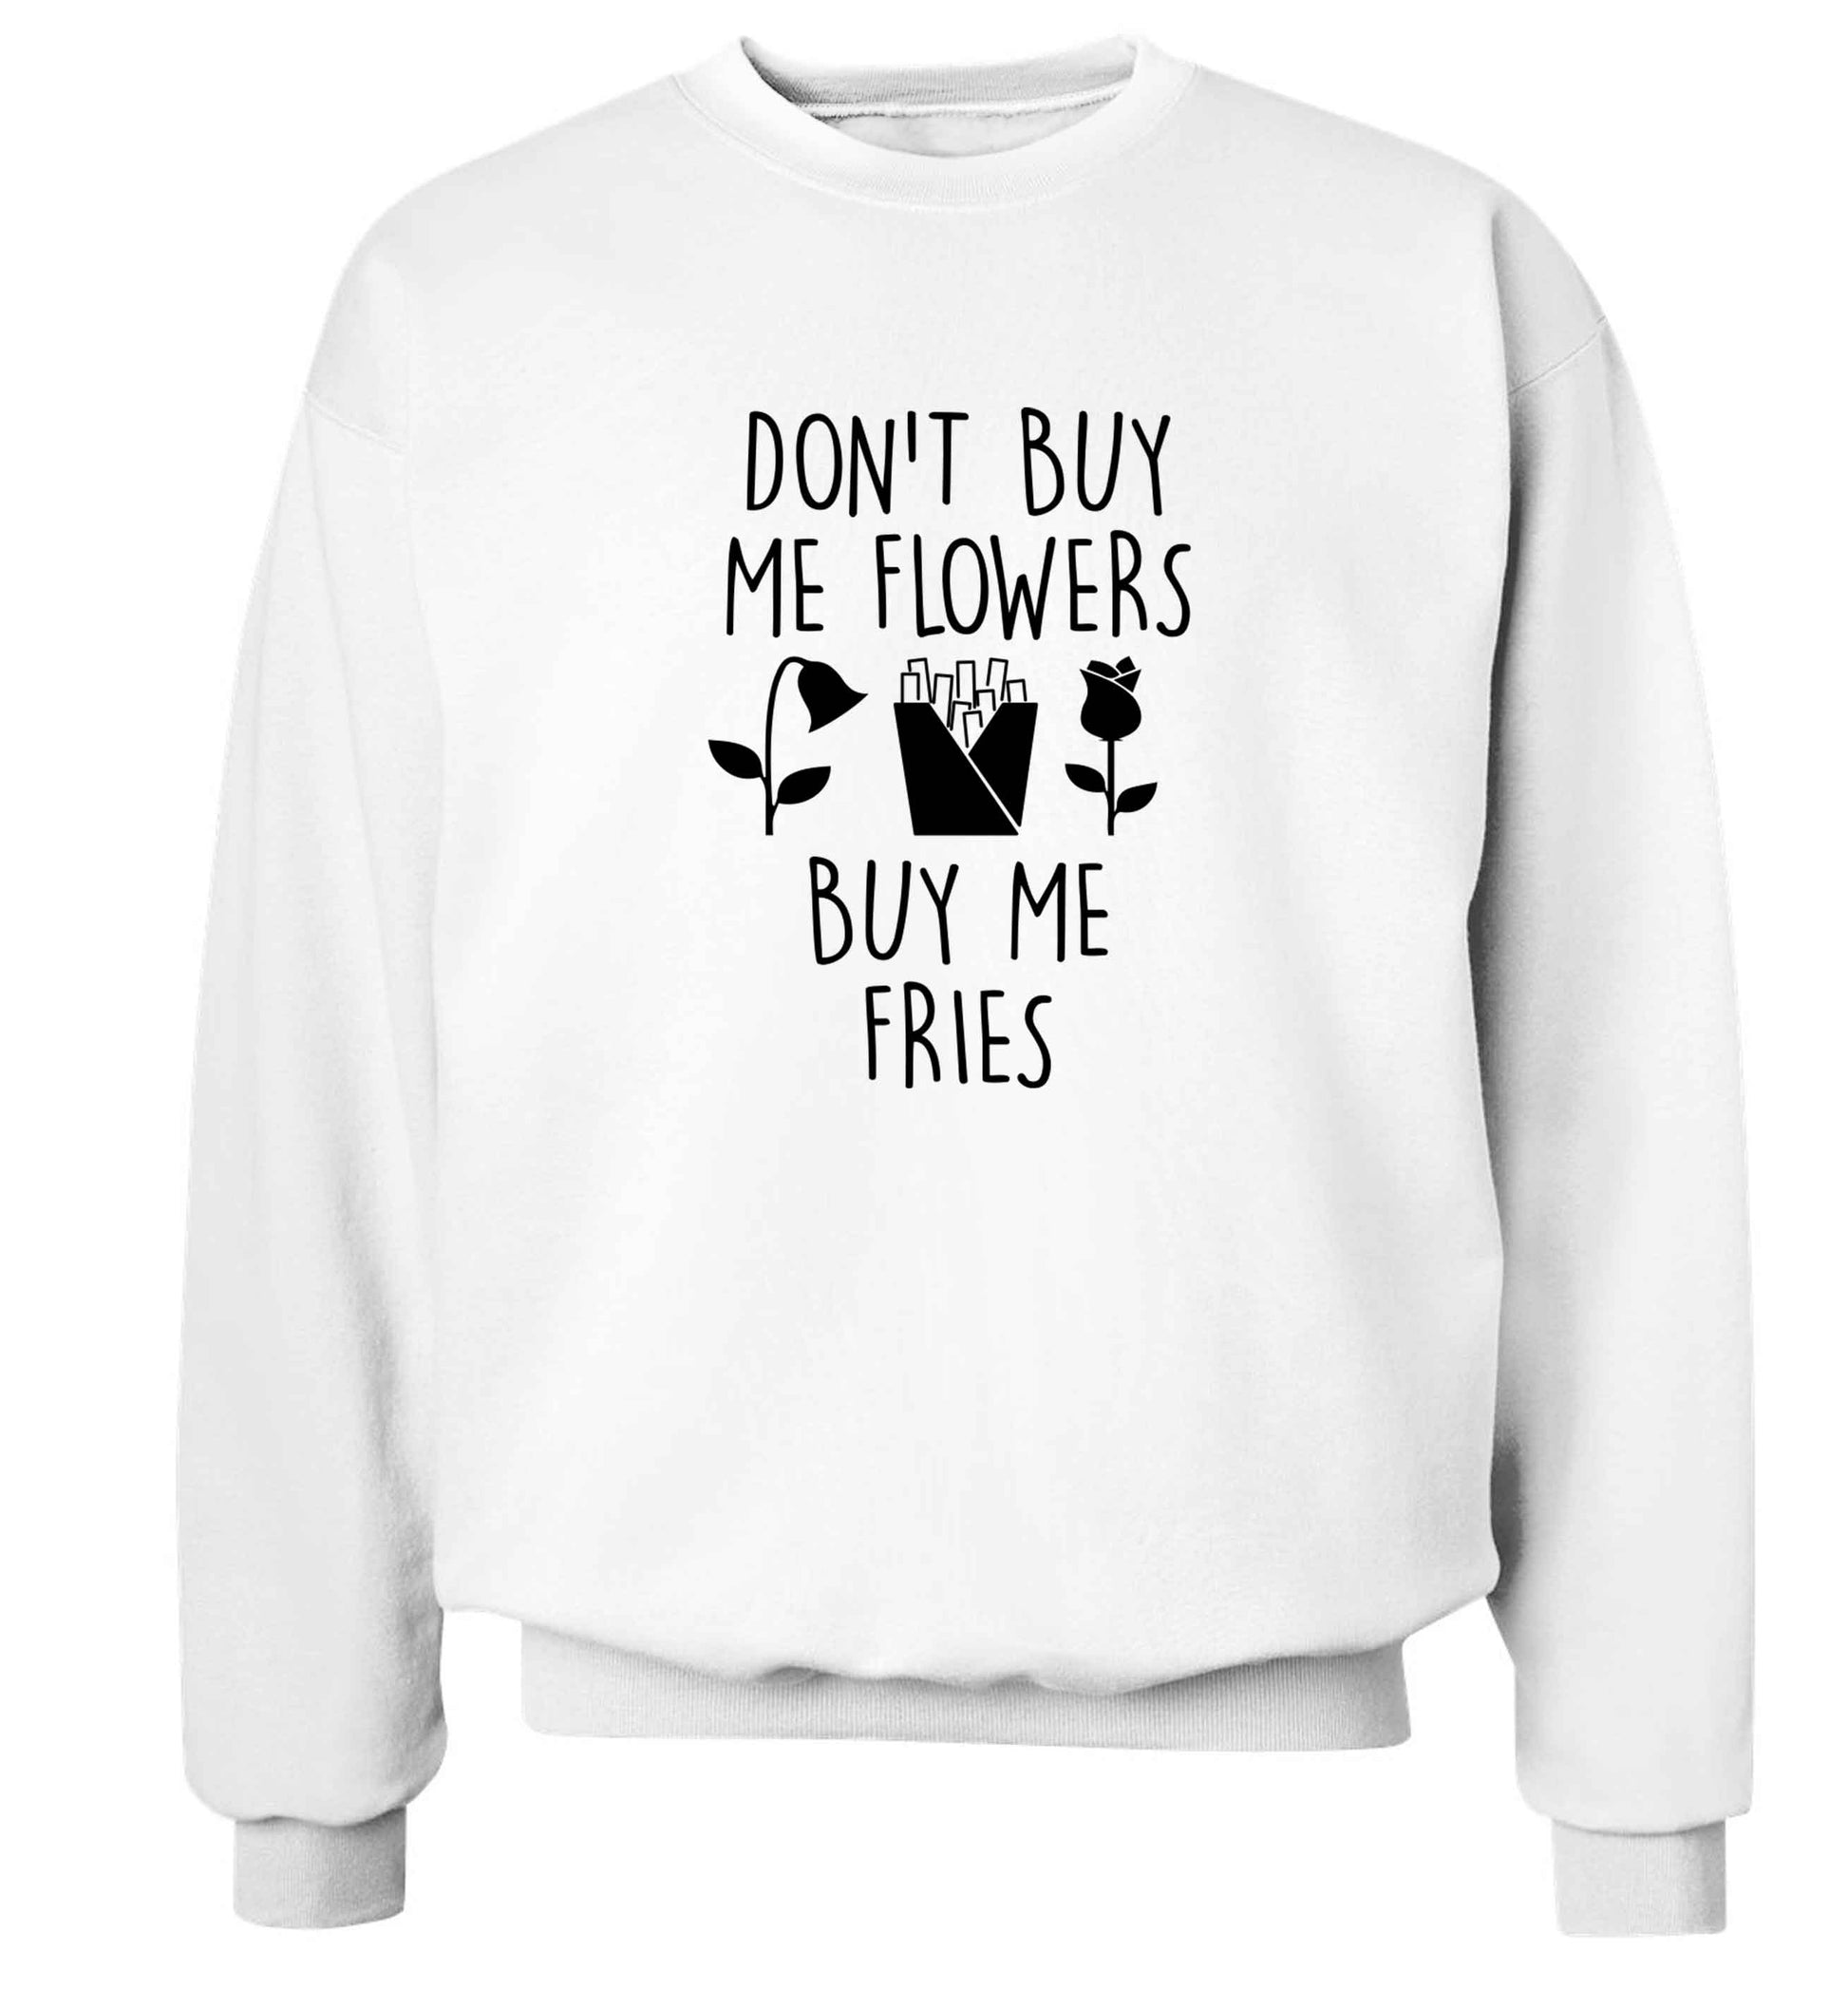 Don't buy me flowers buy me fries adult's unisex white sweater 2XL